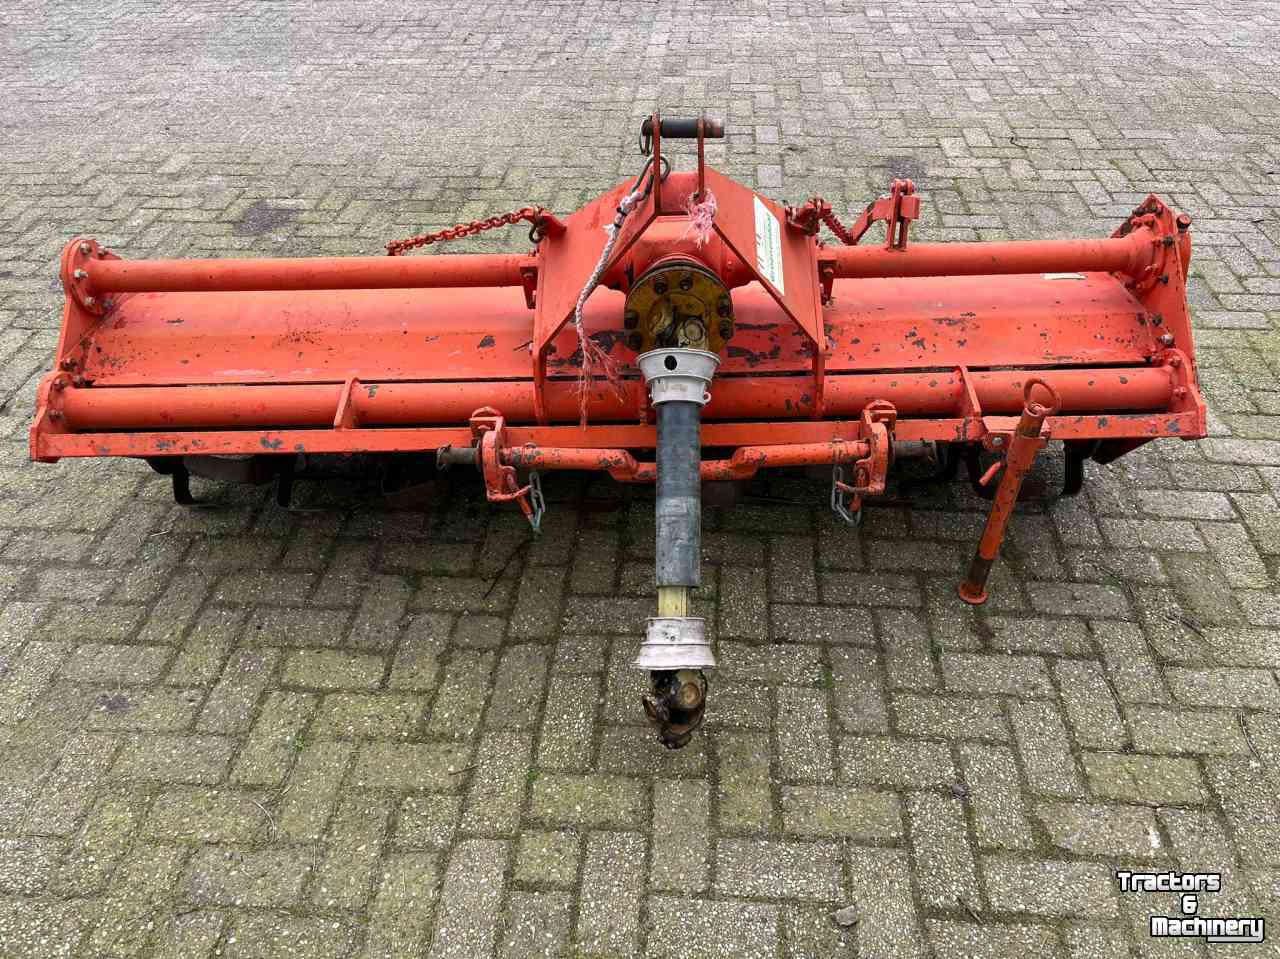 Fraise rotative Agric AMS 80 grondfrees